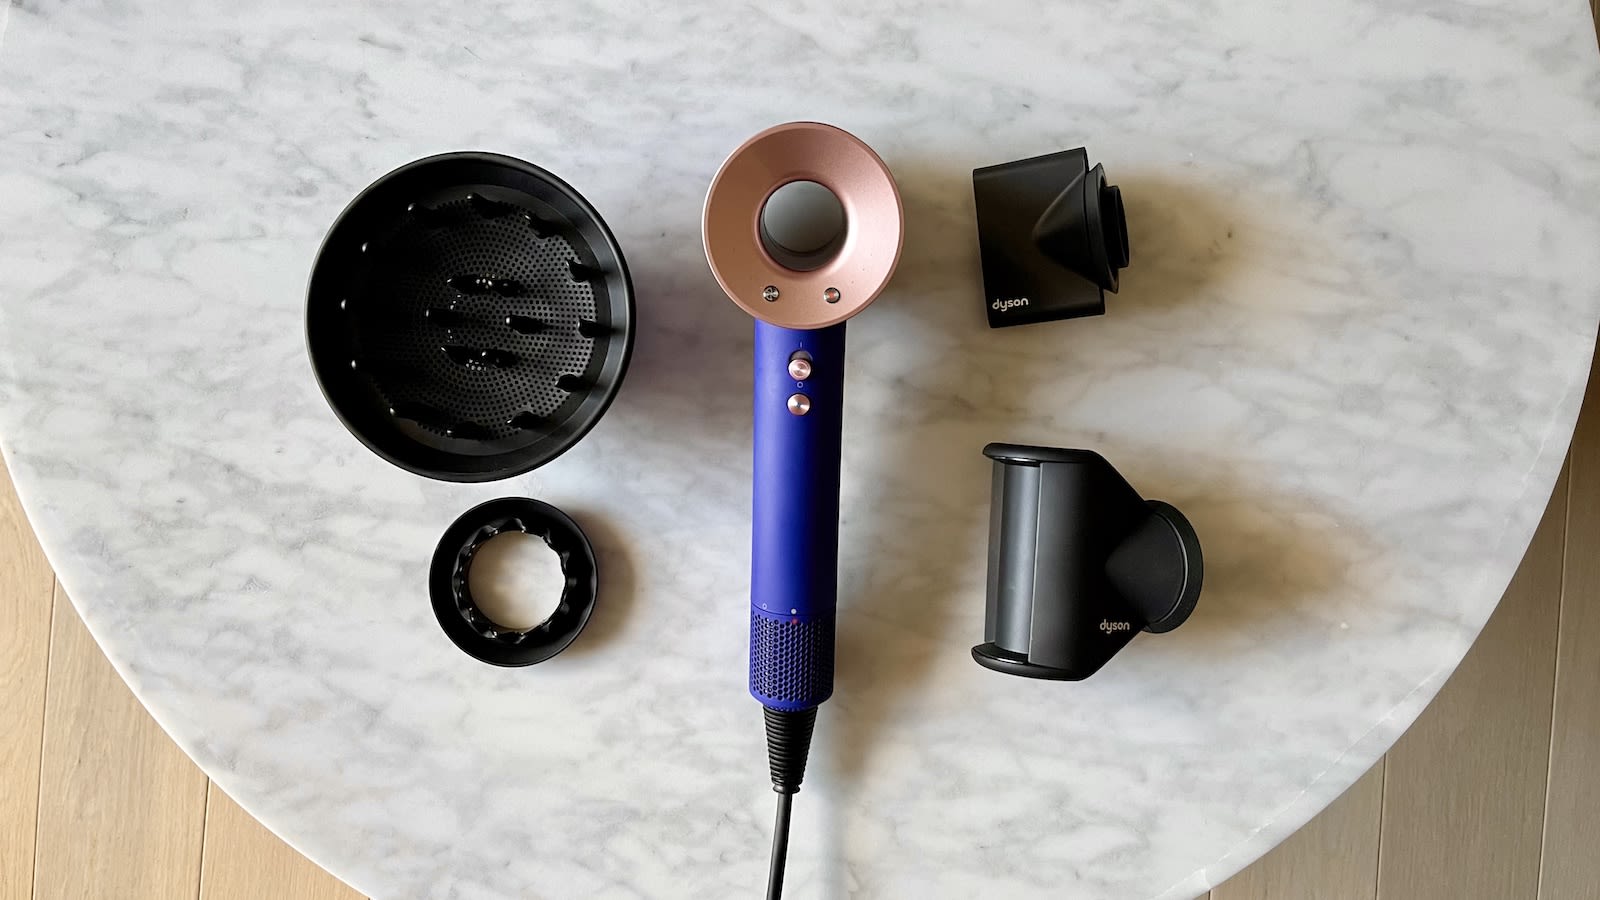 Dyson Supersonic sale: Save $180 on this refurbished hair dryer